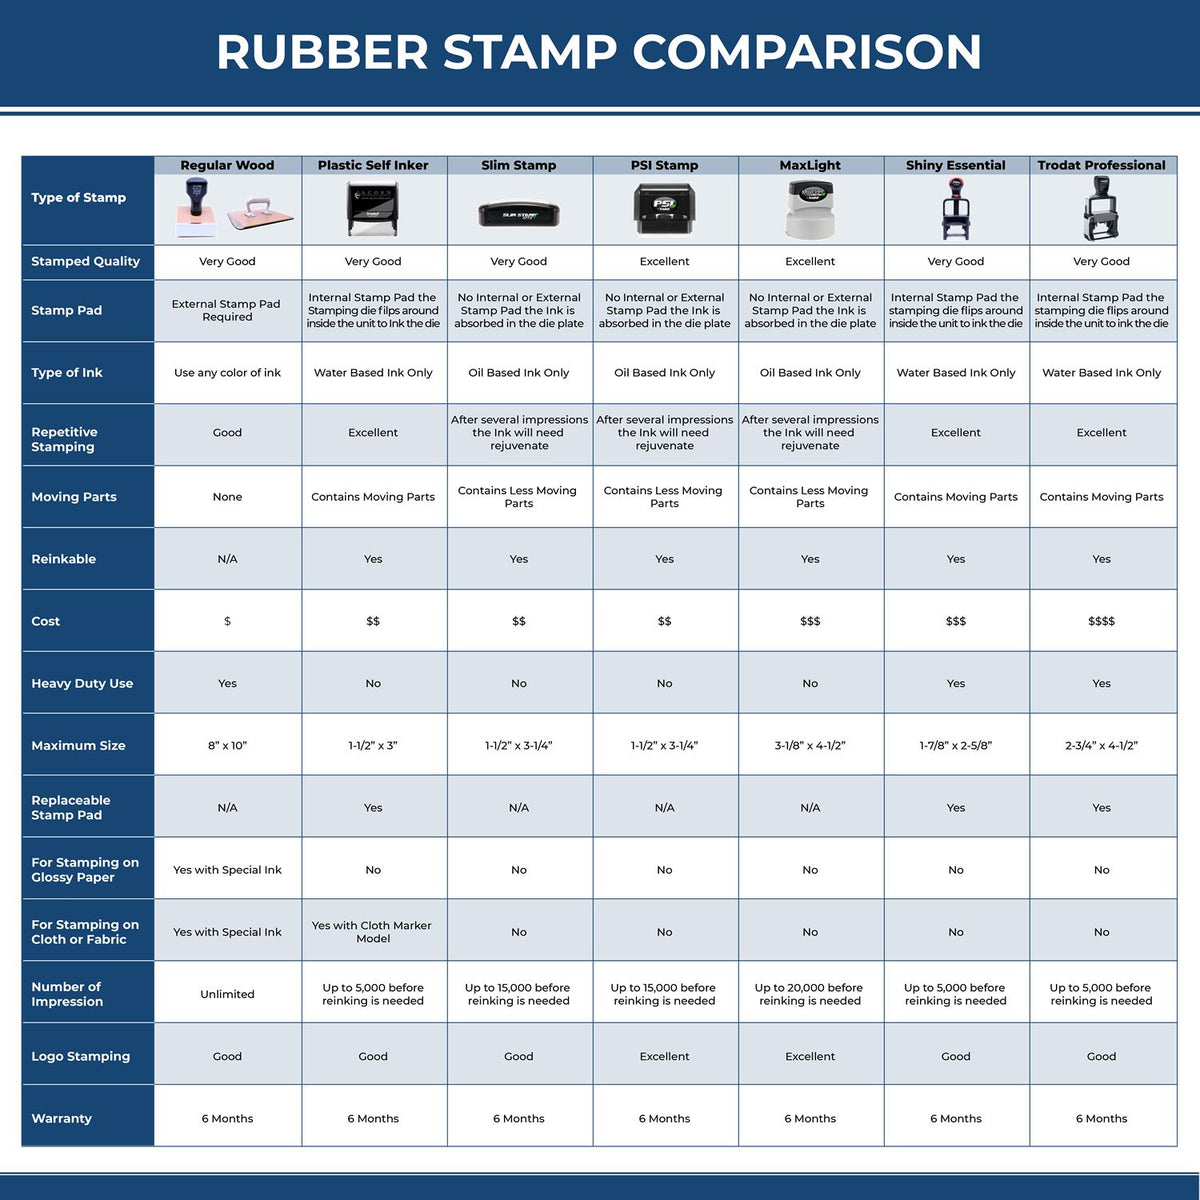 A comparison chart for the different types of mount models available for the MaxLight Premium Pre-Inked Texas State Seal Notarial Stamp.